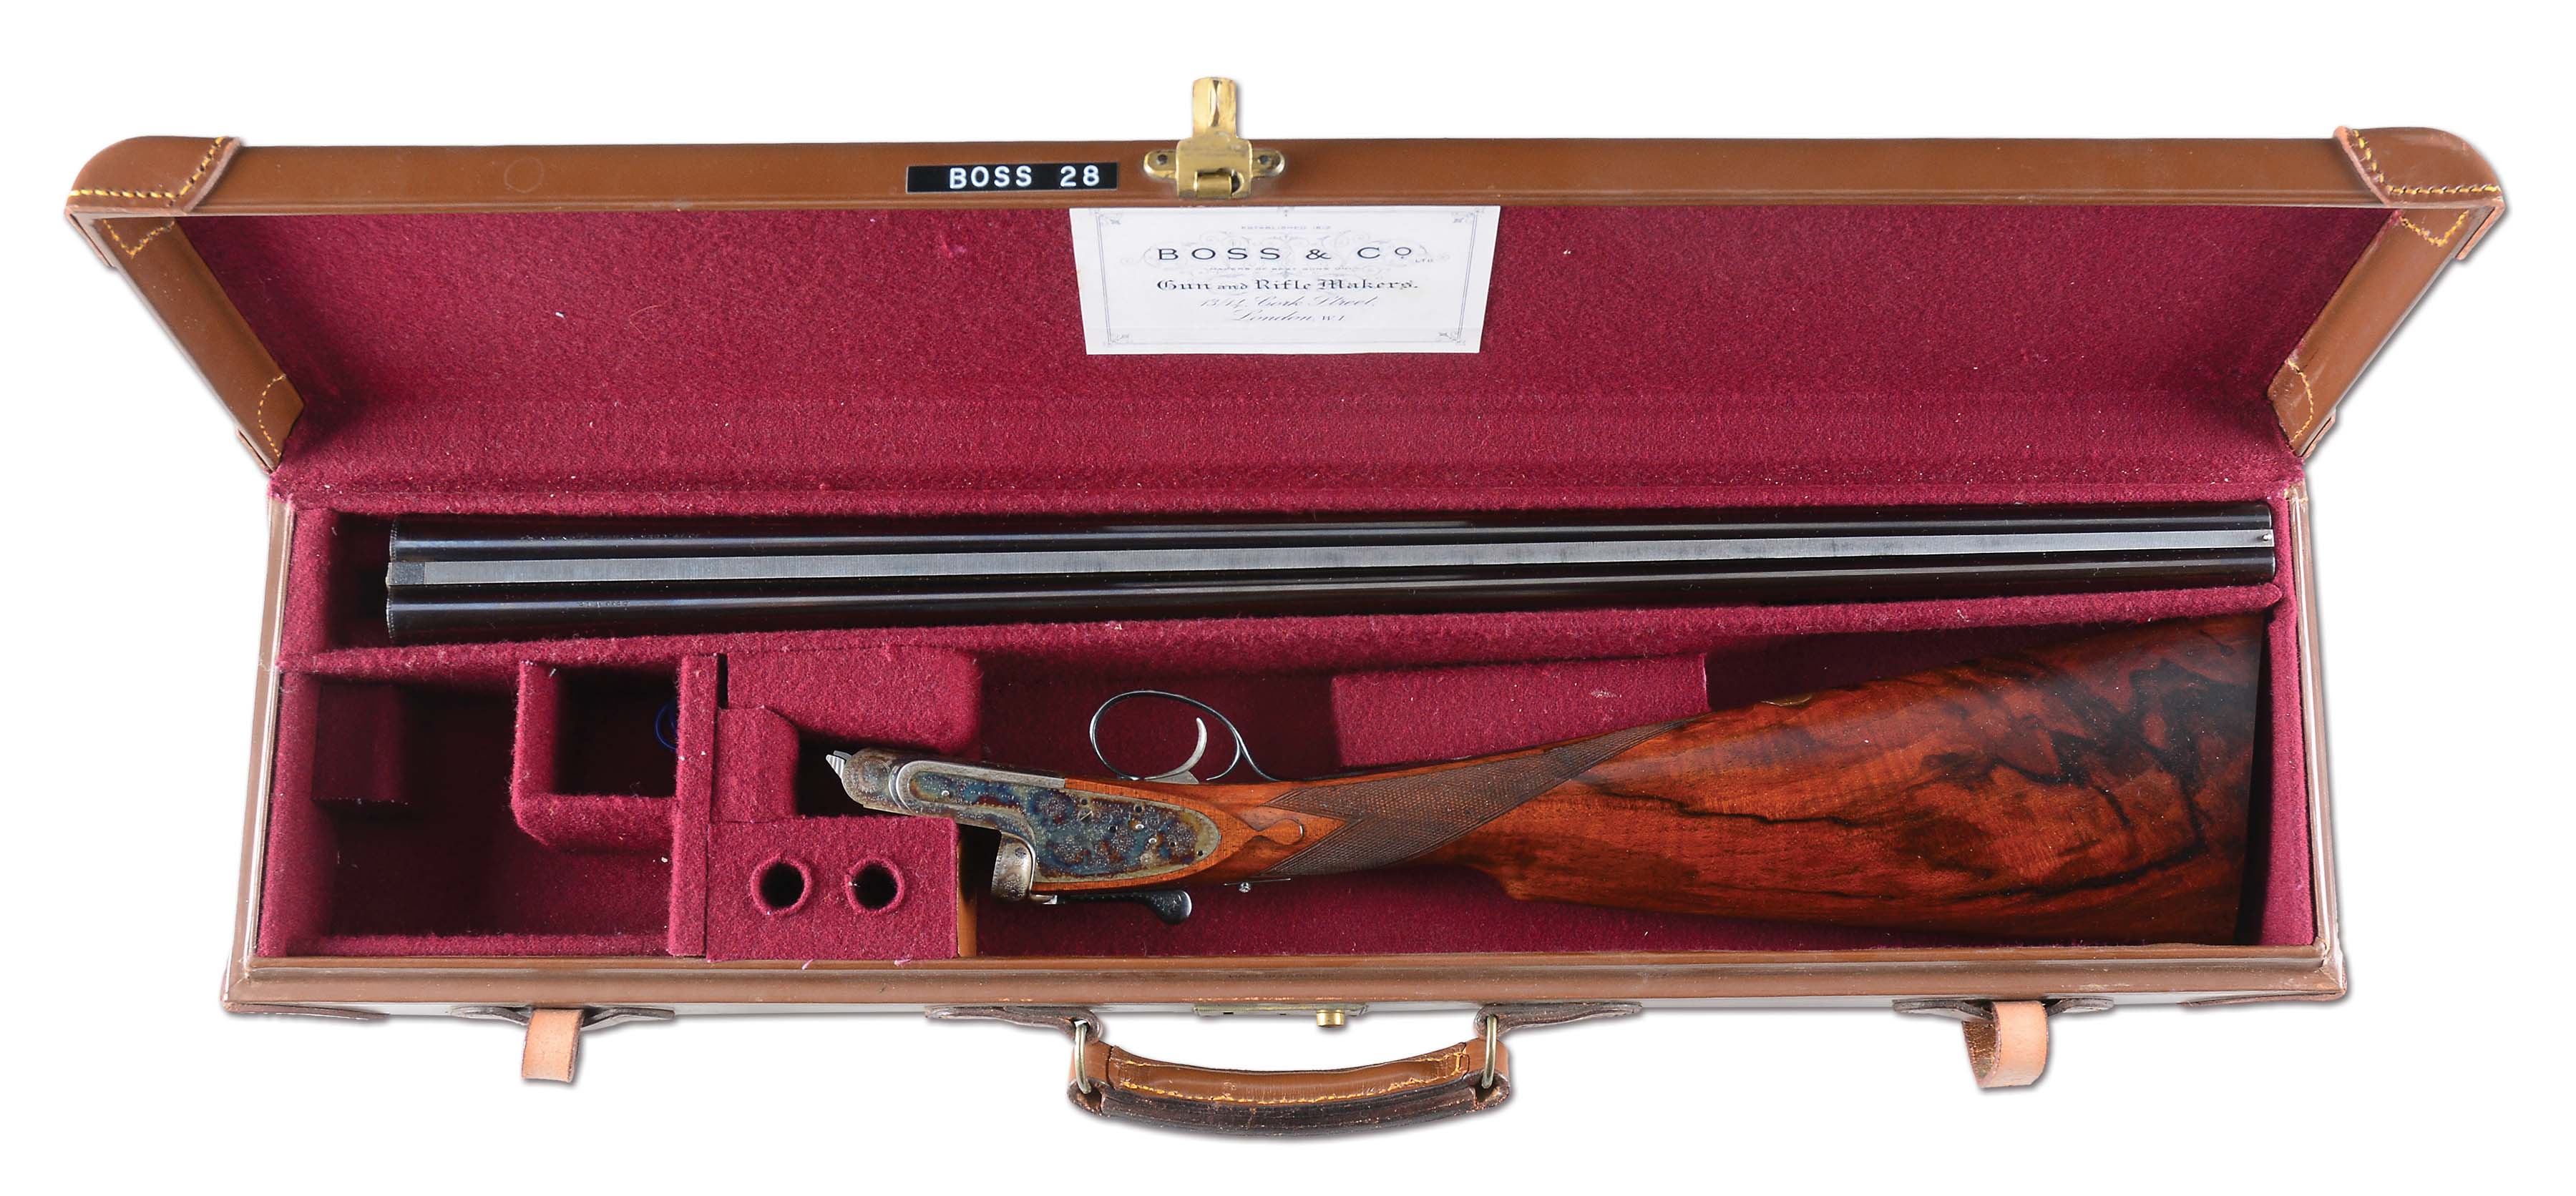 Morphy’s fires shot heard ’round the auction world with $8M sale of vintage guns